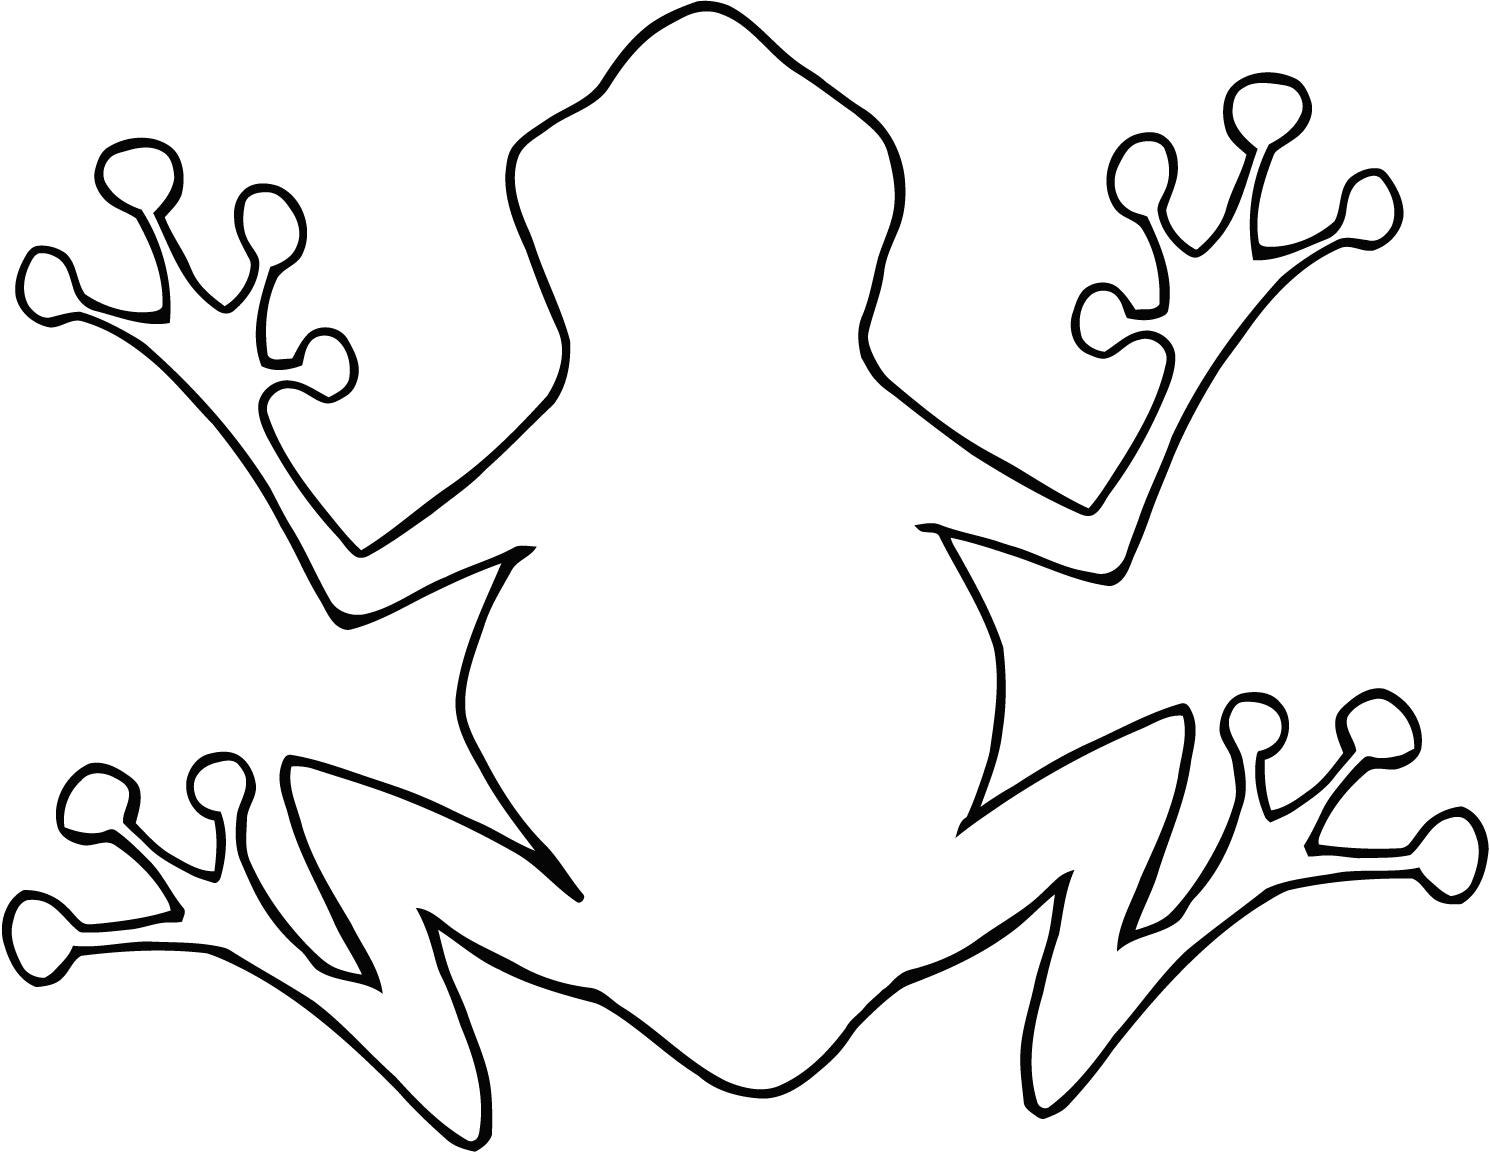 coloring sheet of cartoon outline frog for kids - Coloring Point ...